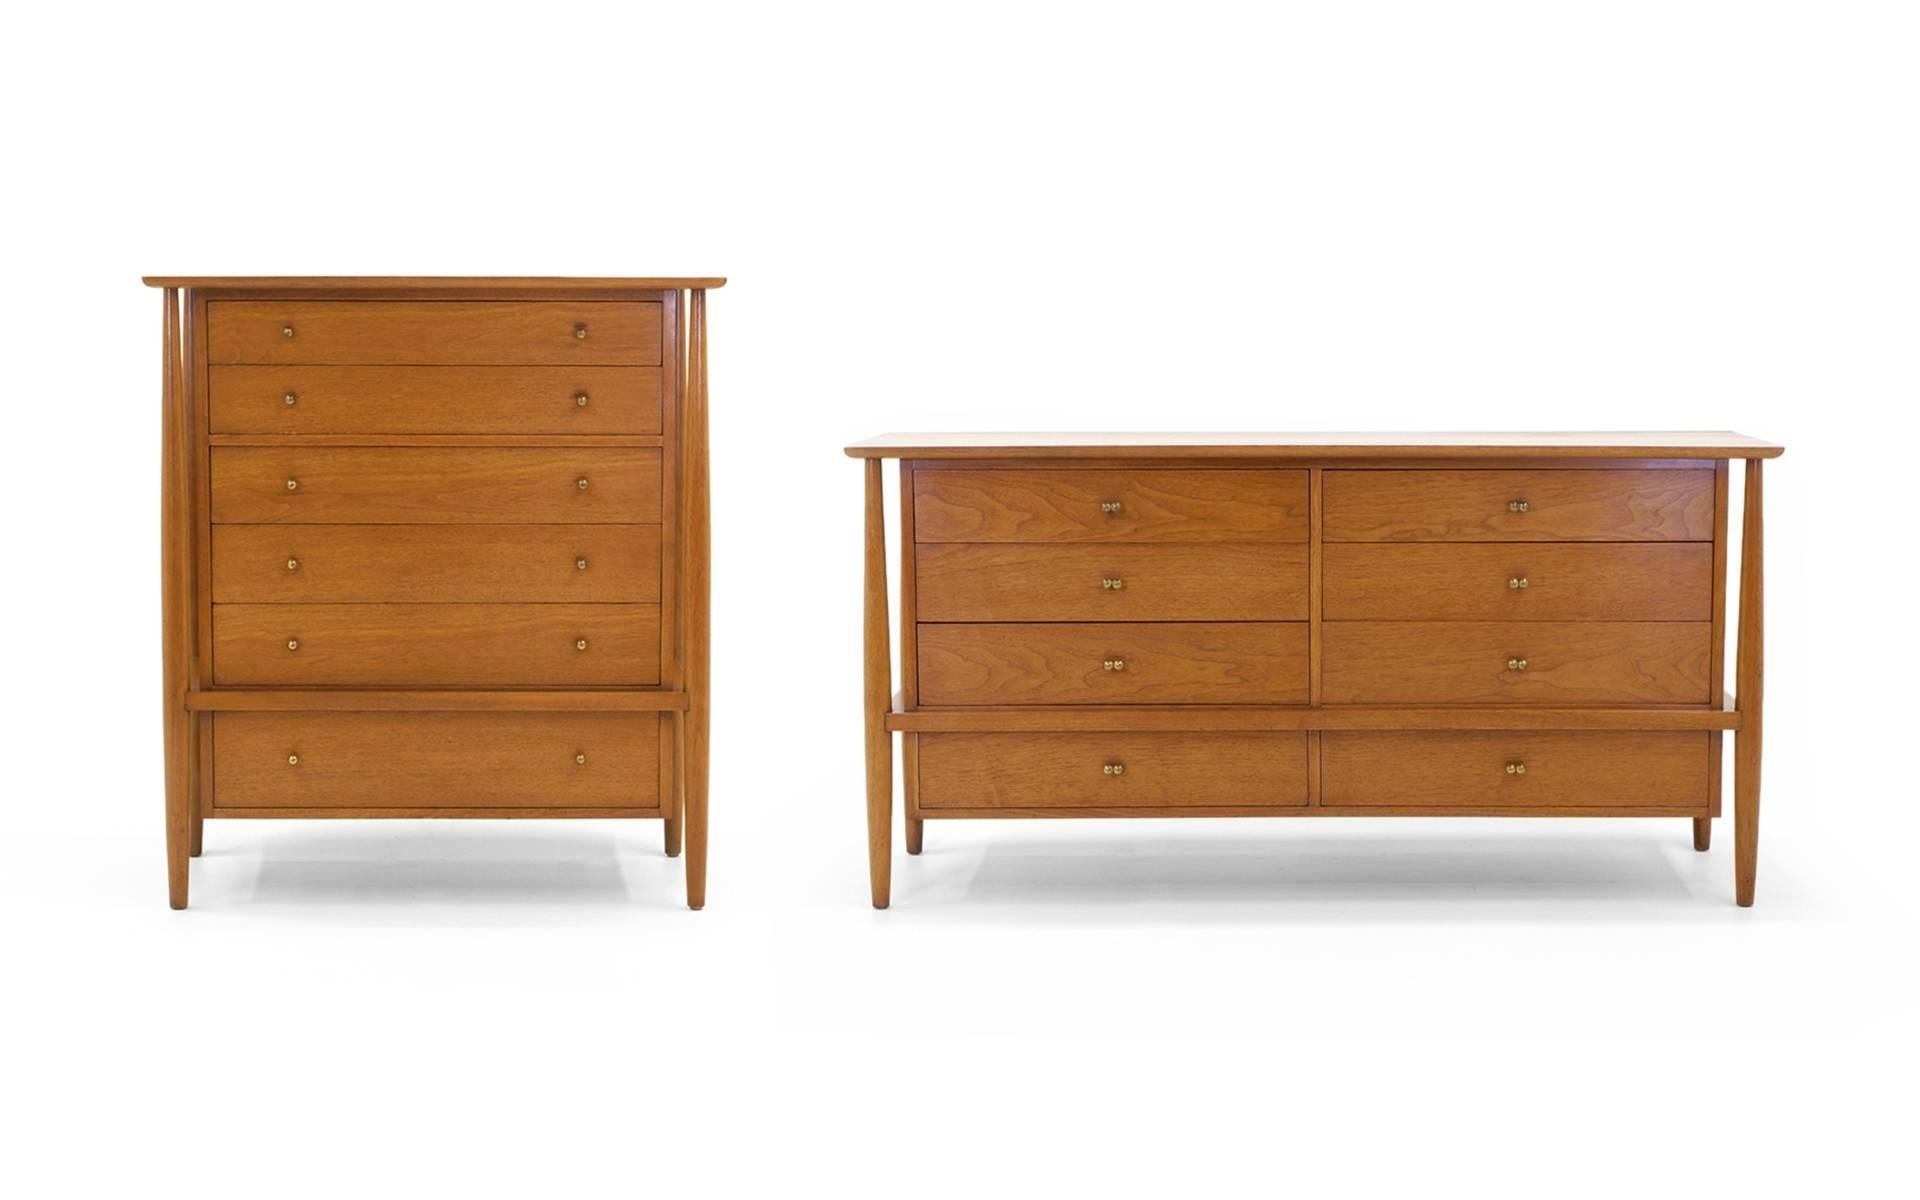 American 1950s-1960s Chest of Drawers in the Style of Finn Juhl